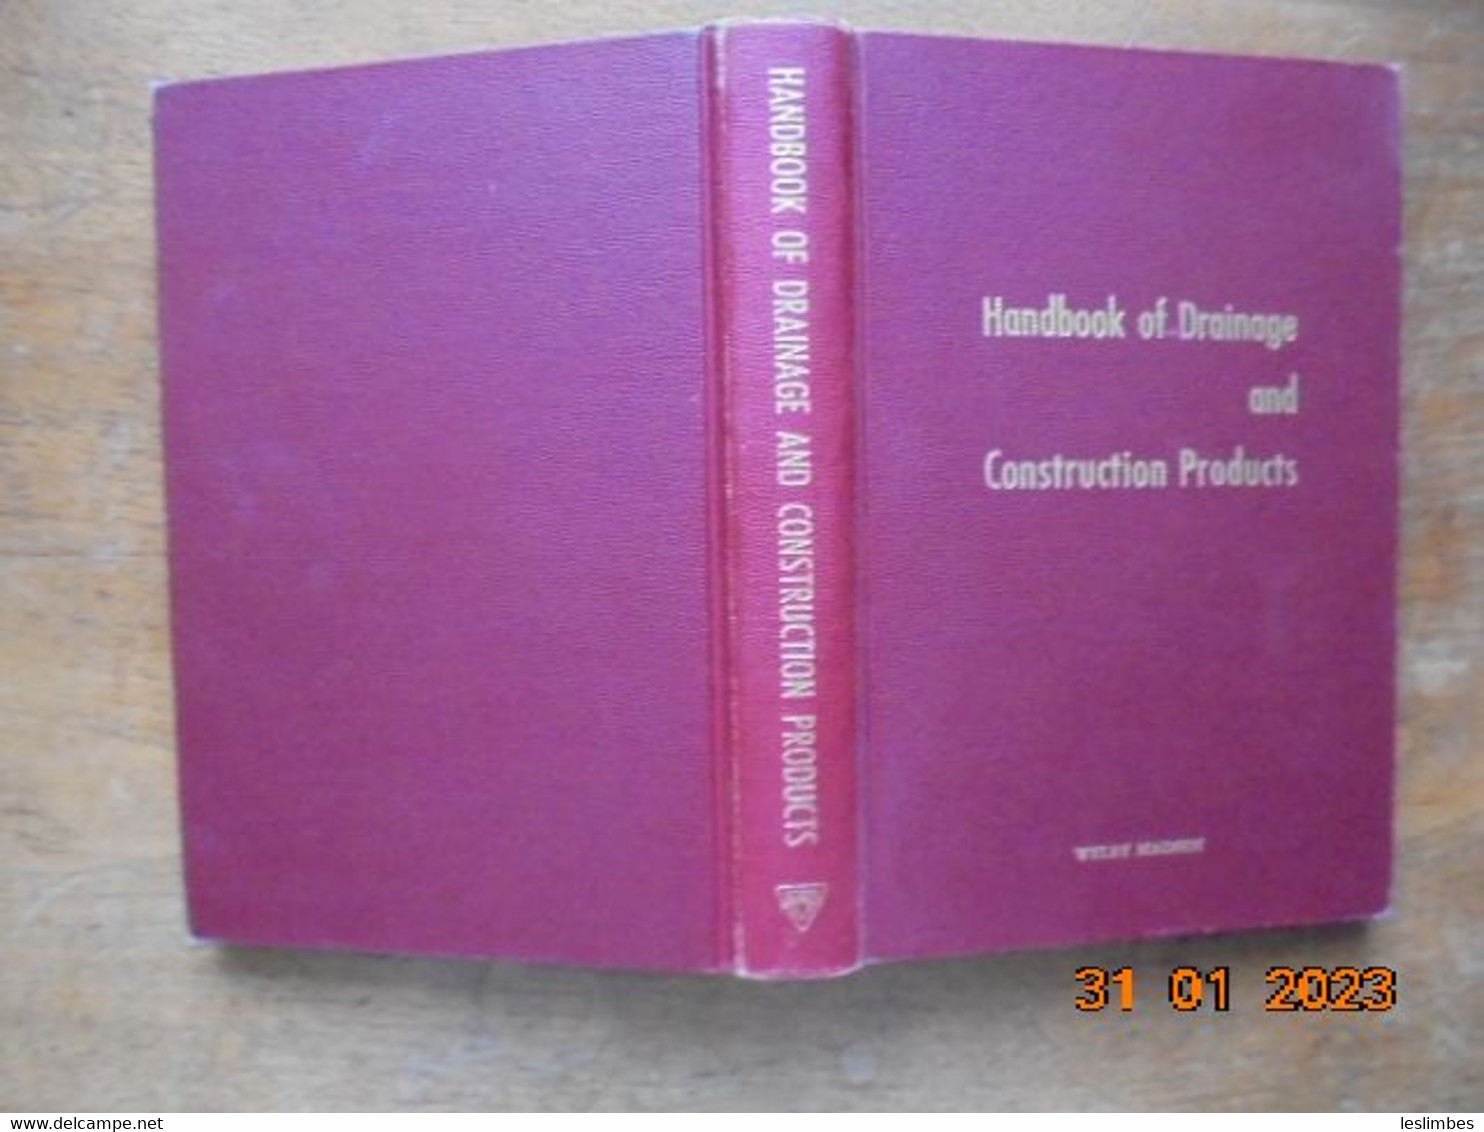 Handbook Of Drainage And Construction Products - Armco Drainage & Metal Products 1955 - Ingegneria